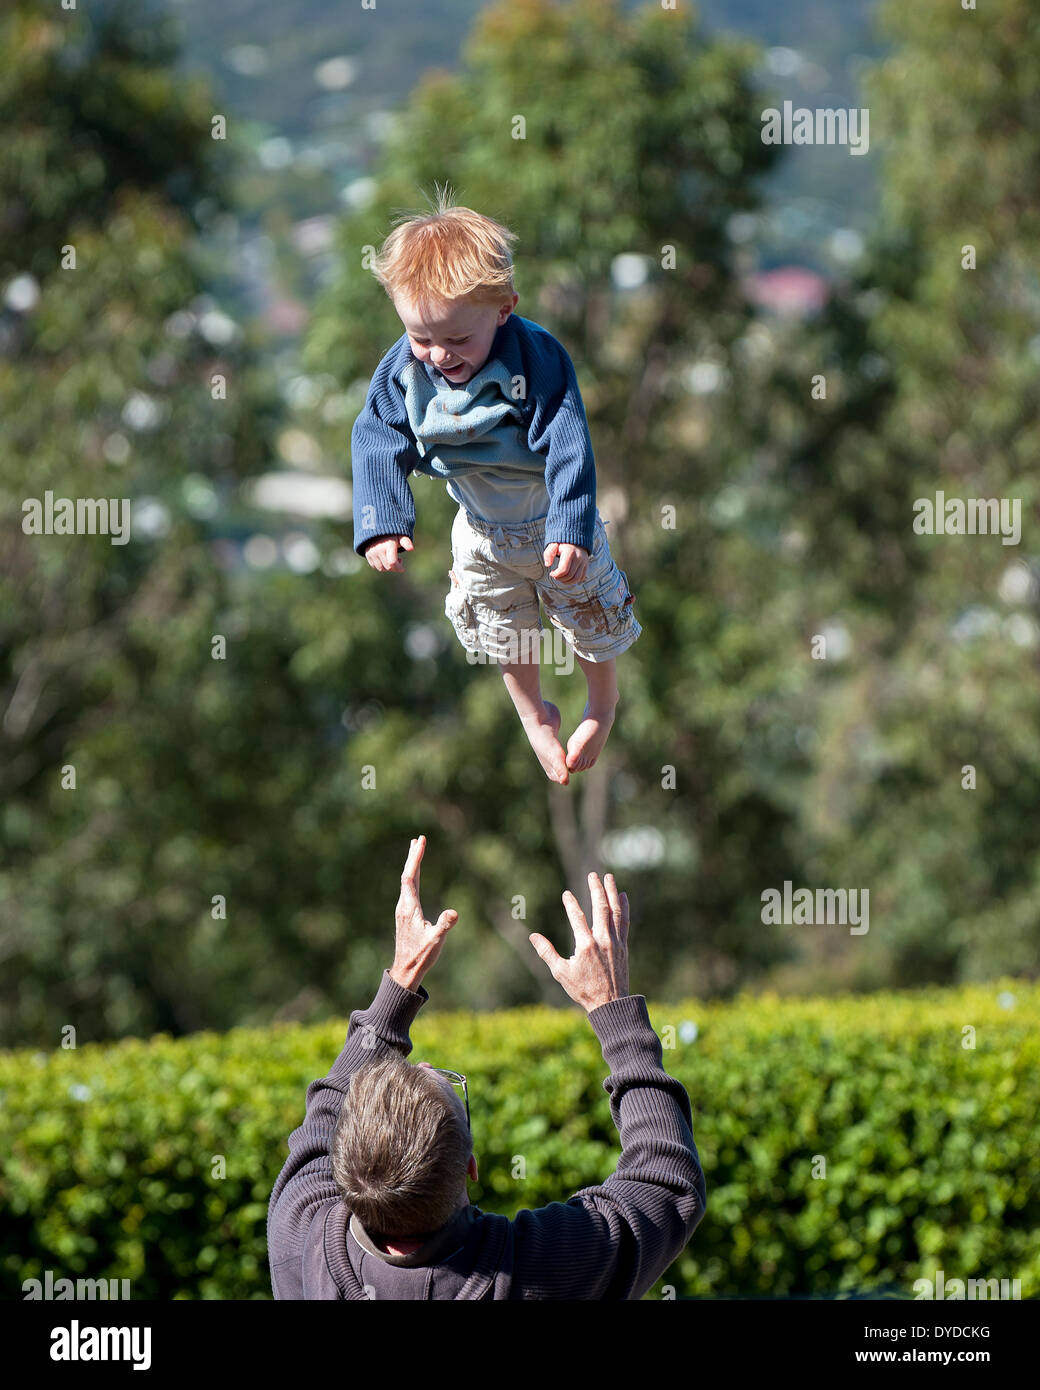 A father throwing his young son into the air. Stock Photo